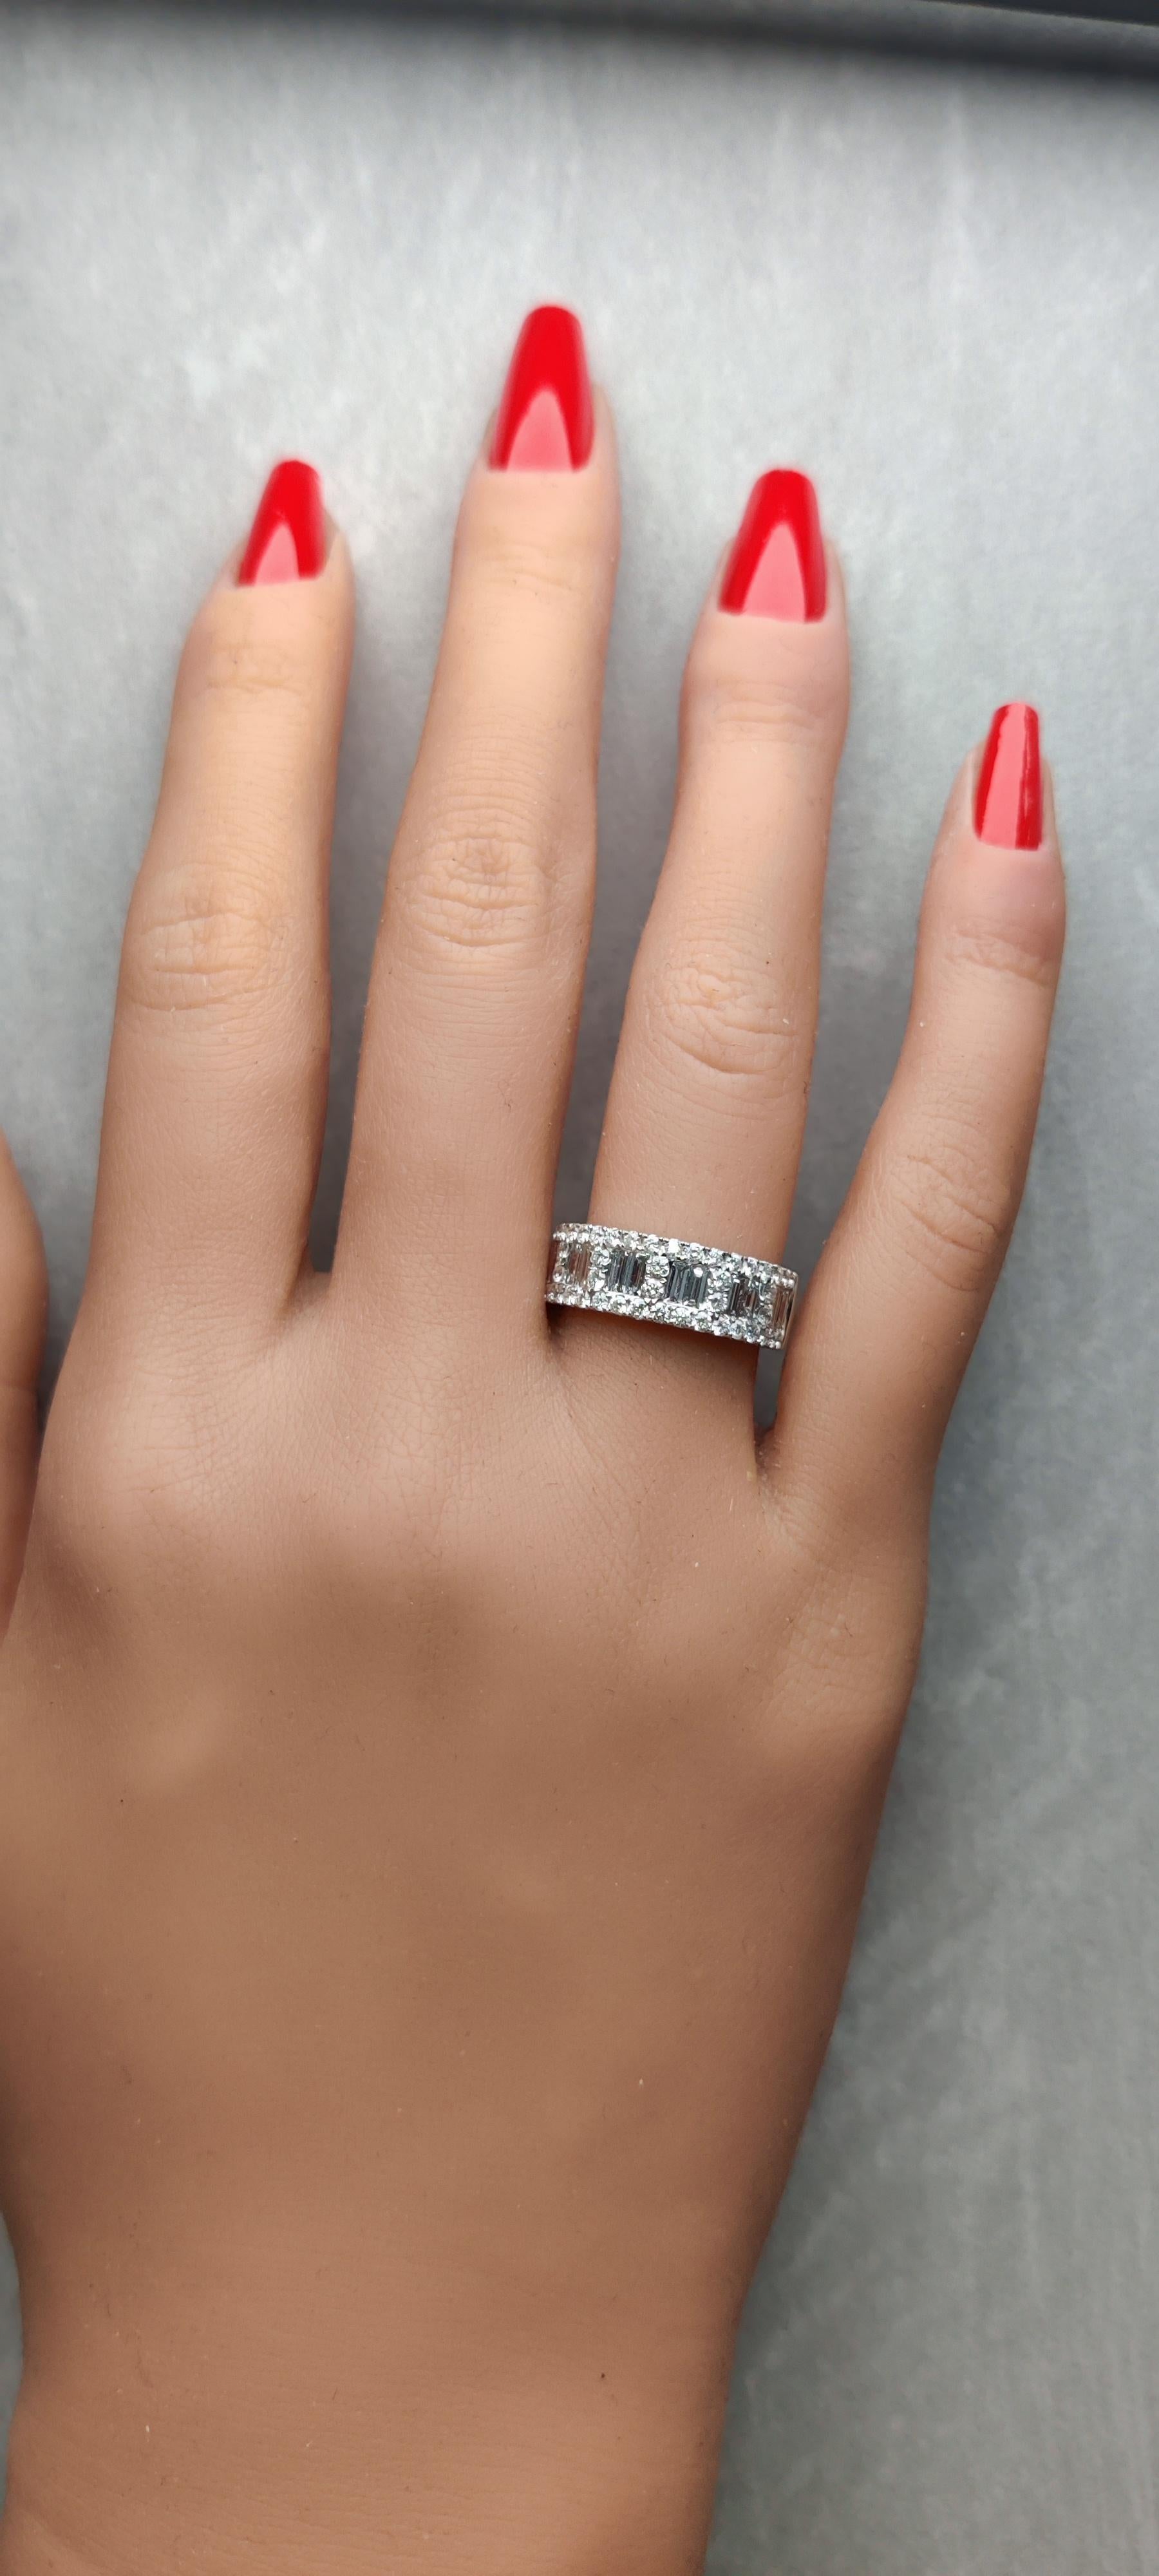 RareGemWorld's classic diamond band. Mounted in a beautiful 18K White Gold setting with natural baguette white diamonds complimented by natural round white diamond melee. This band is guaranteed to impress and enhance your personal